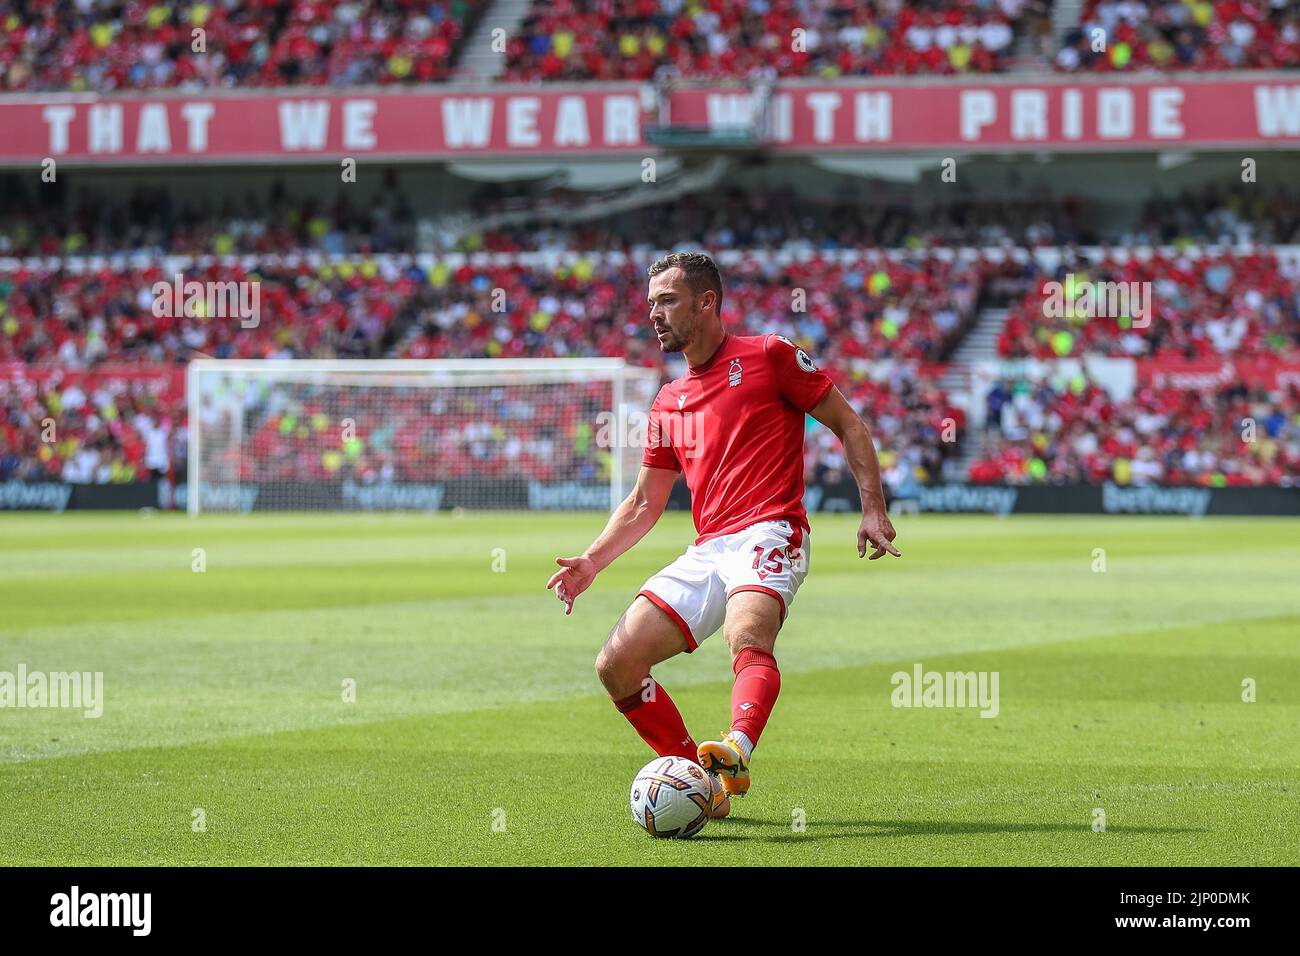 Harry Toffolo #15 of Nottingham Forest controls the ball Stock Photo